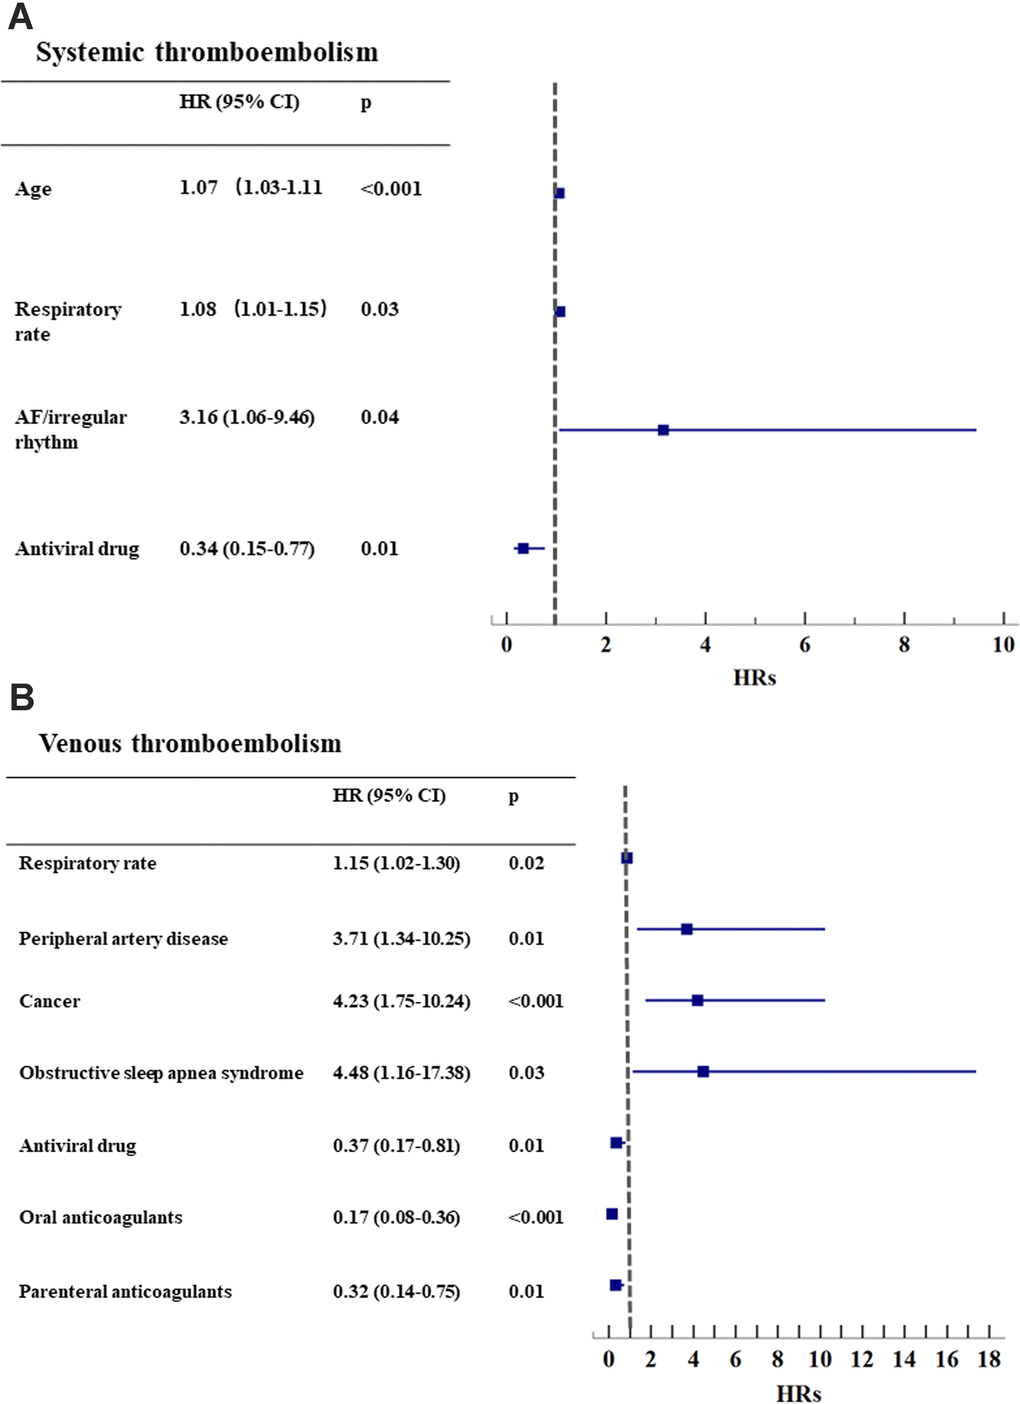 Subgroup analysis for systemic and venous thromboembolism. (A) Systemic thromboembolism (n=37); (B) Venous thromboembolism (n=45). * AF: atrial fibrillation. HR: hazard ratio. CI: confidential interval.